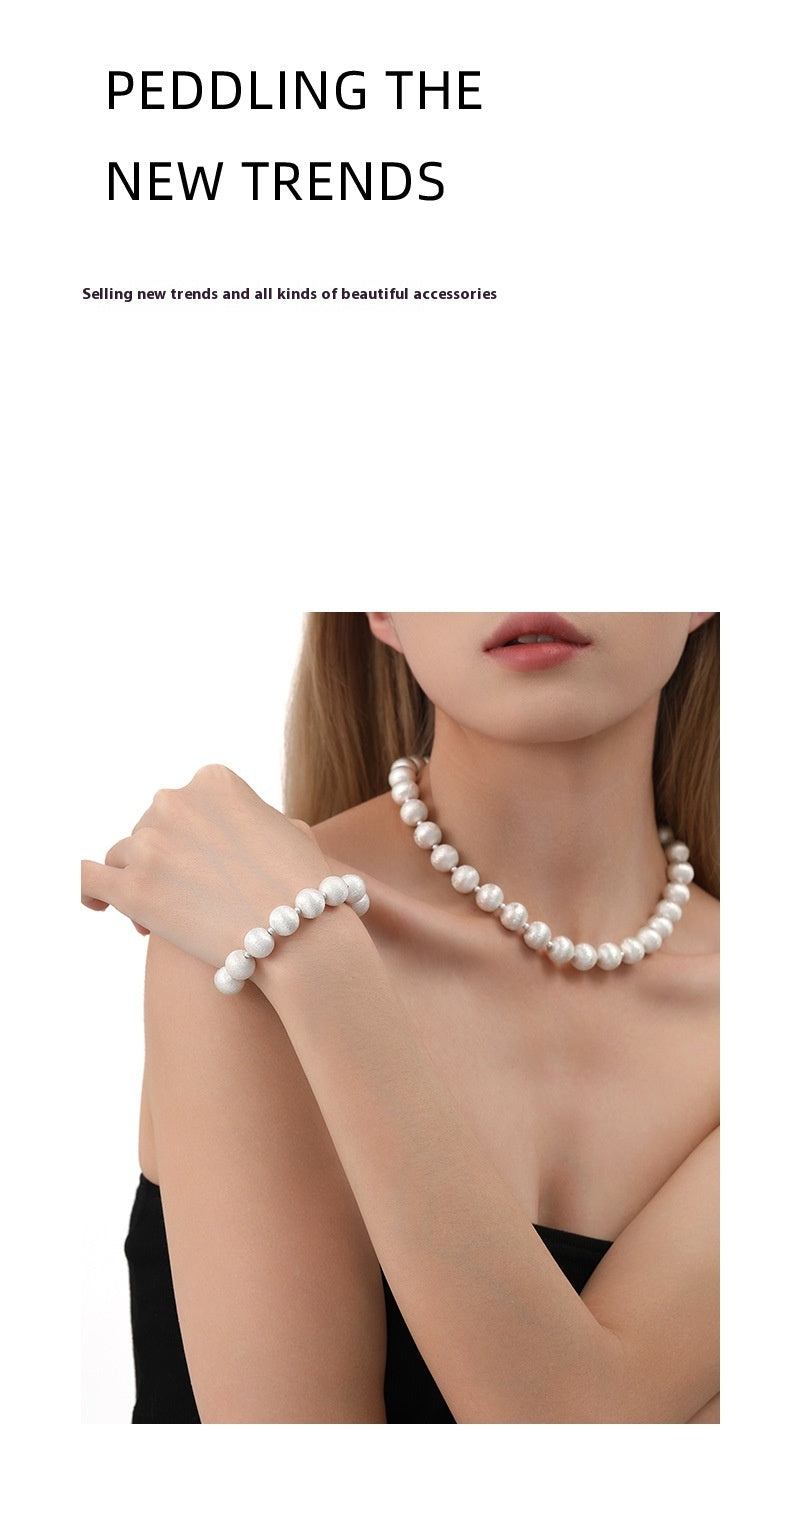 Original Design Niche Drawing Beads Fried Street Round Beads Clavicle Personality Bracelet And Necklace Set